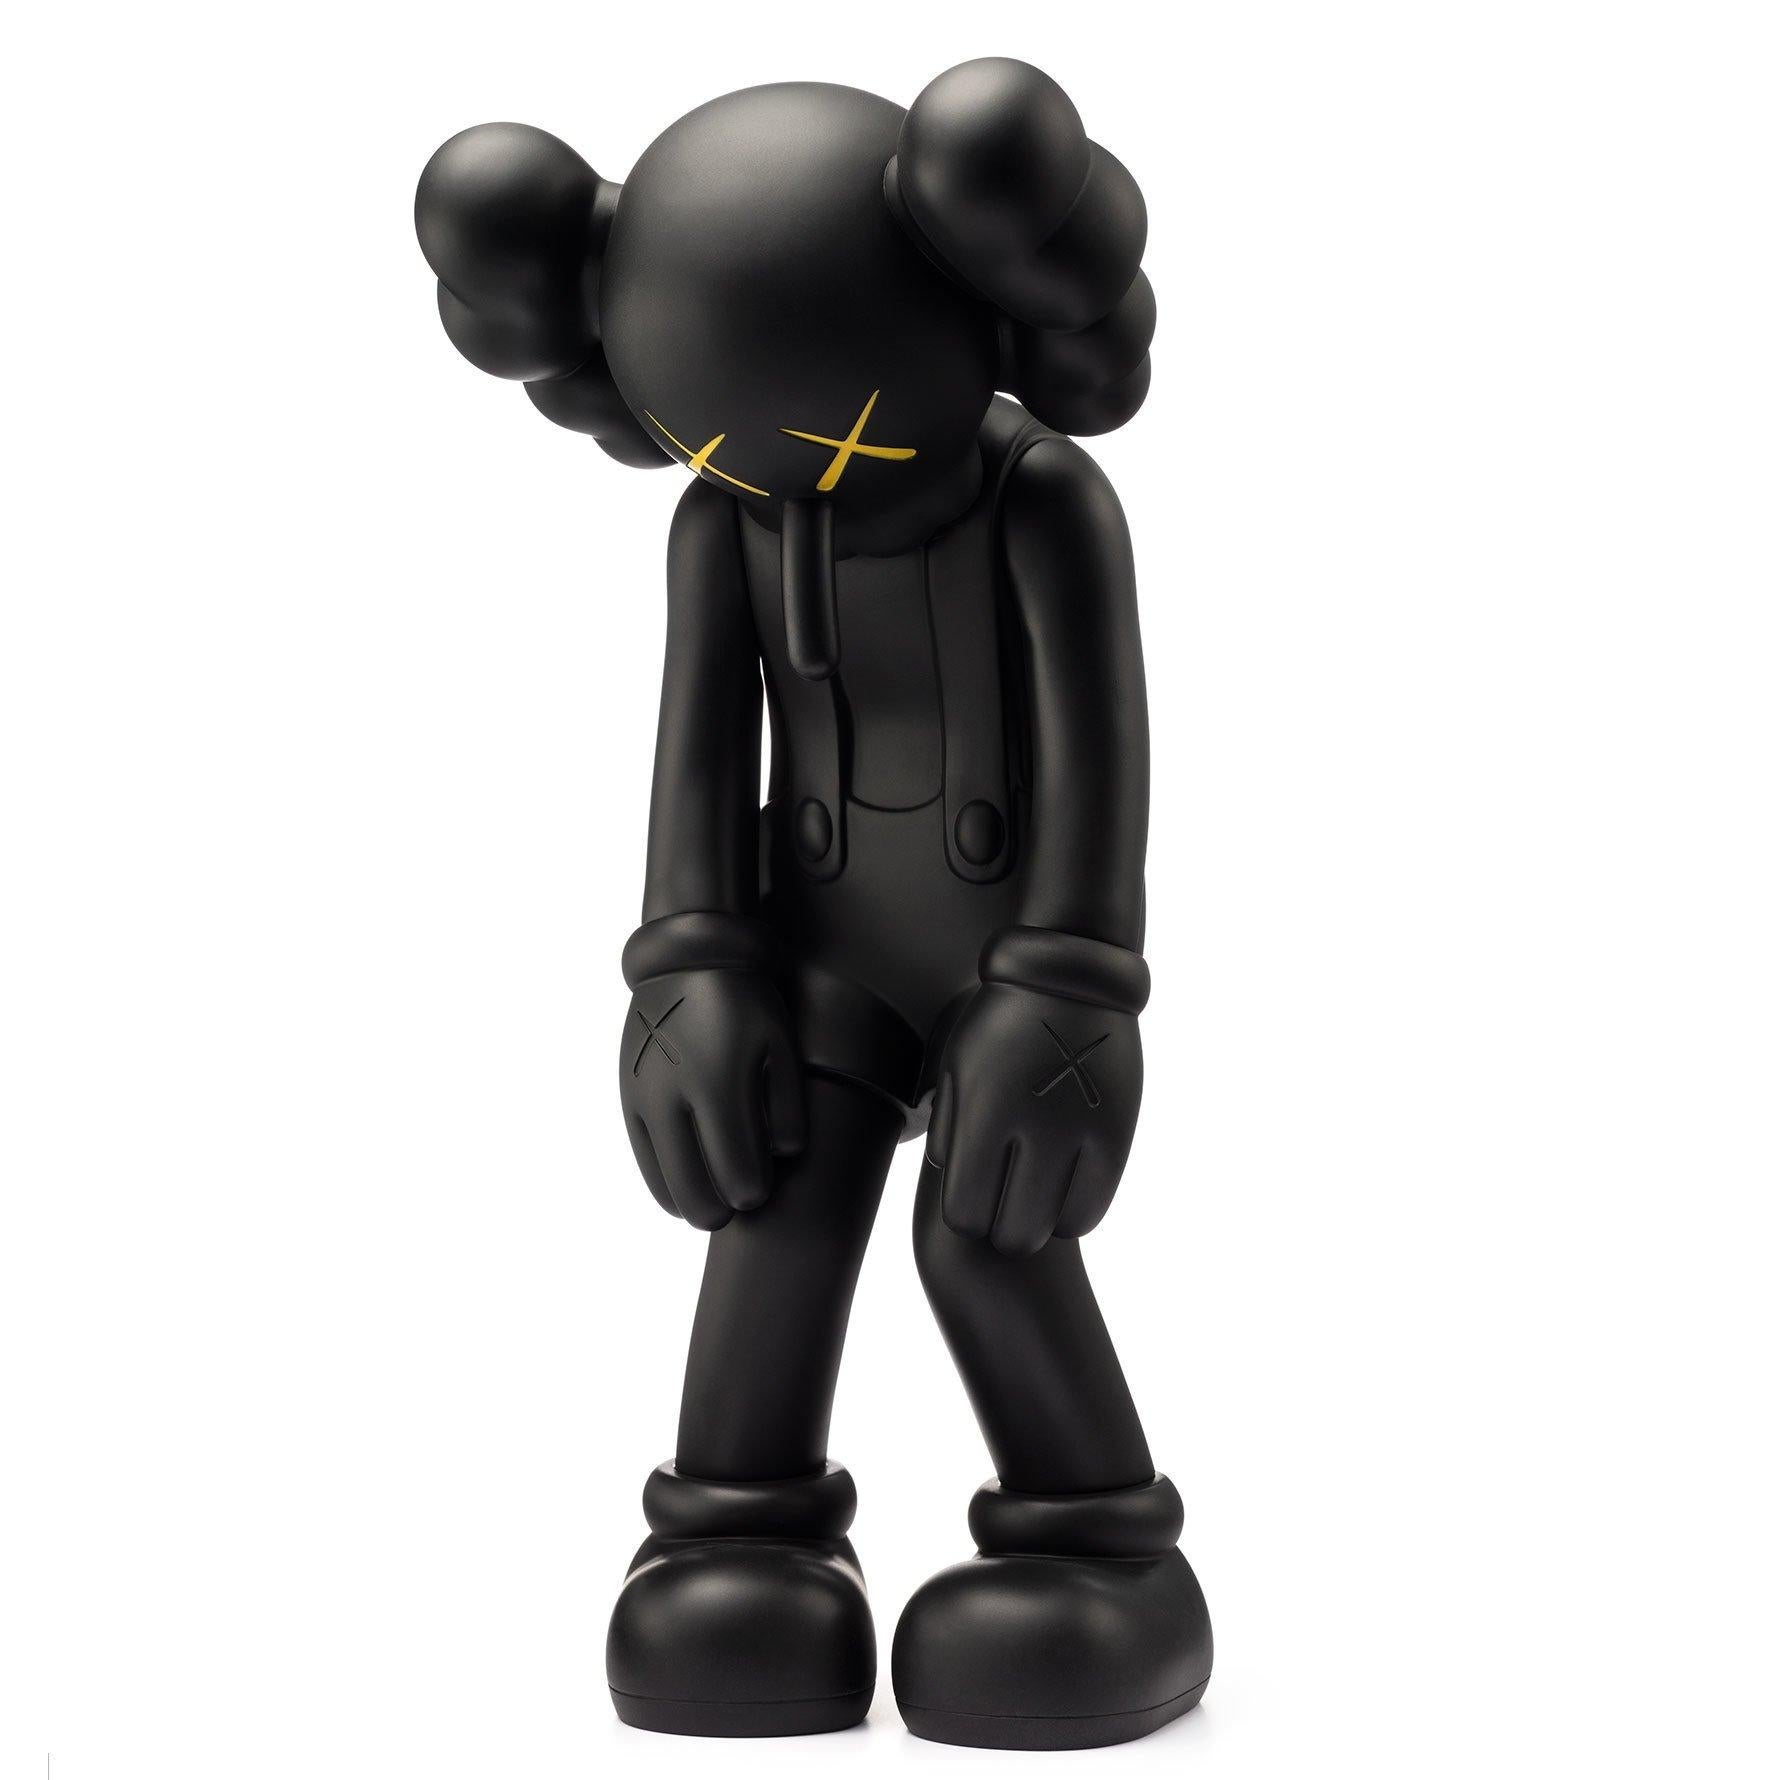 Small Lie (Black)
Date of creation: 2017
Medium: Sculpture
Media: Vinyl
Edition: Unknown and sold out
Size: 27.5 x 12.3 x 13 cm
Observations: Vinyl sculpture published in 2017 by KAWS/ORIGINALFAKE & Medicom Toys. Sent inside its original box. 